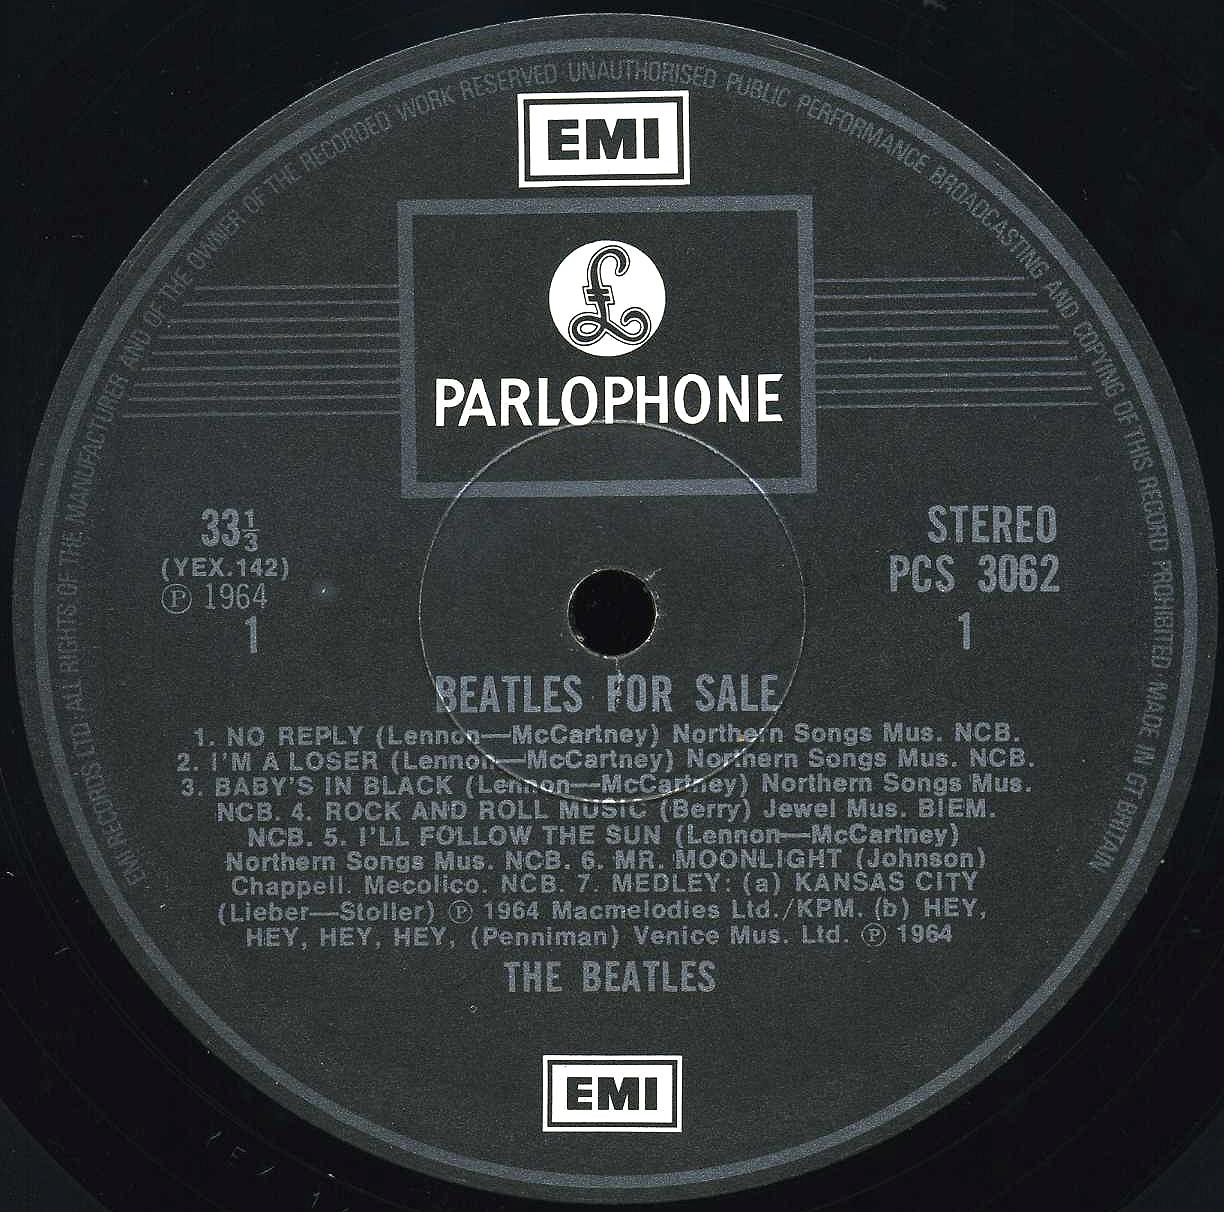 The Beatles Collection » Beatles For Sale, Parlophone, PCS 3062.